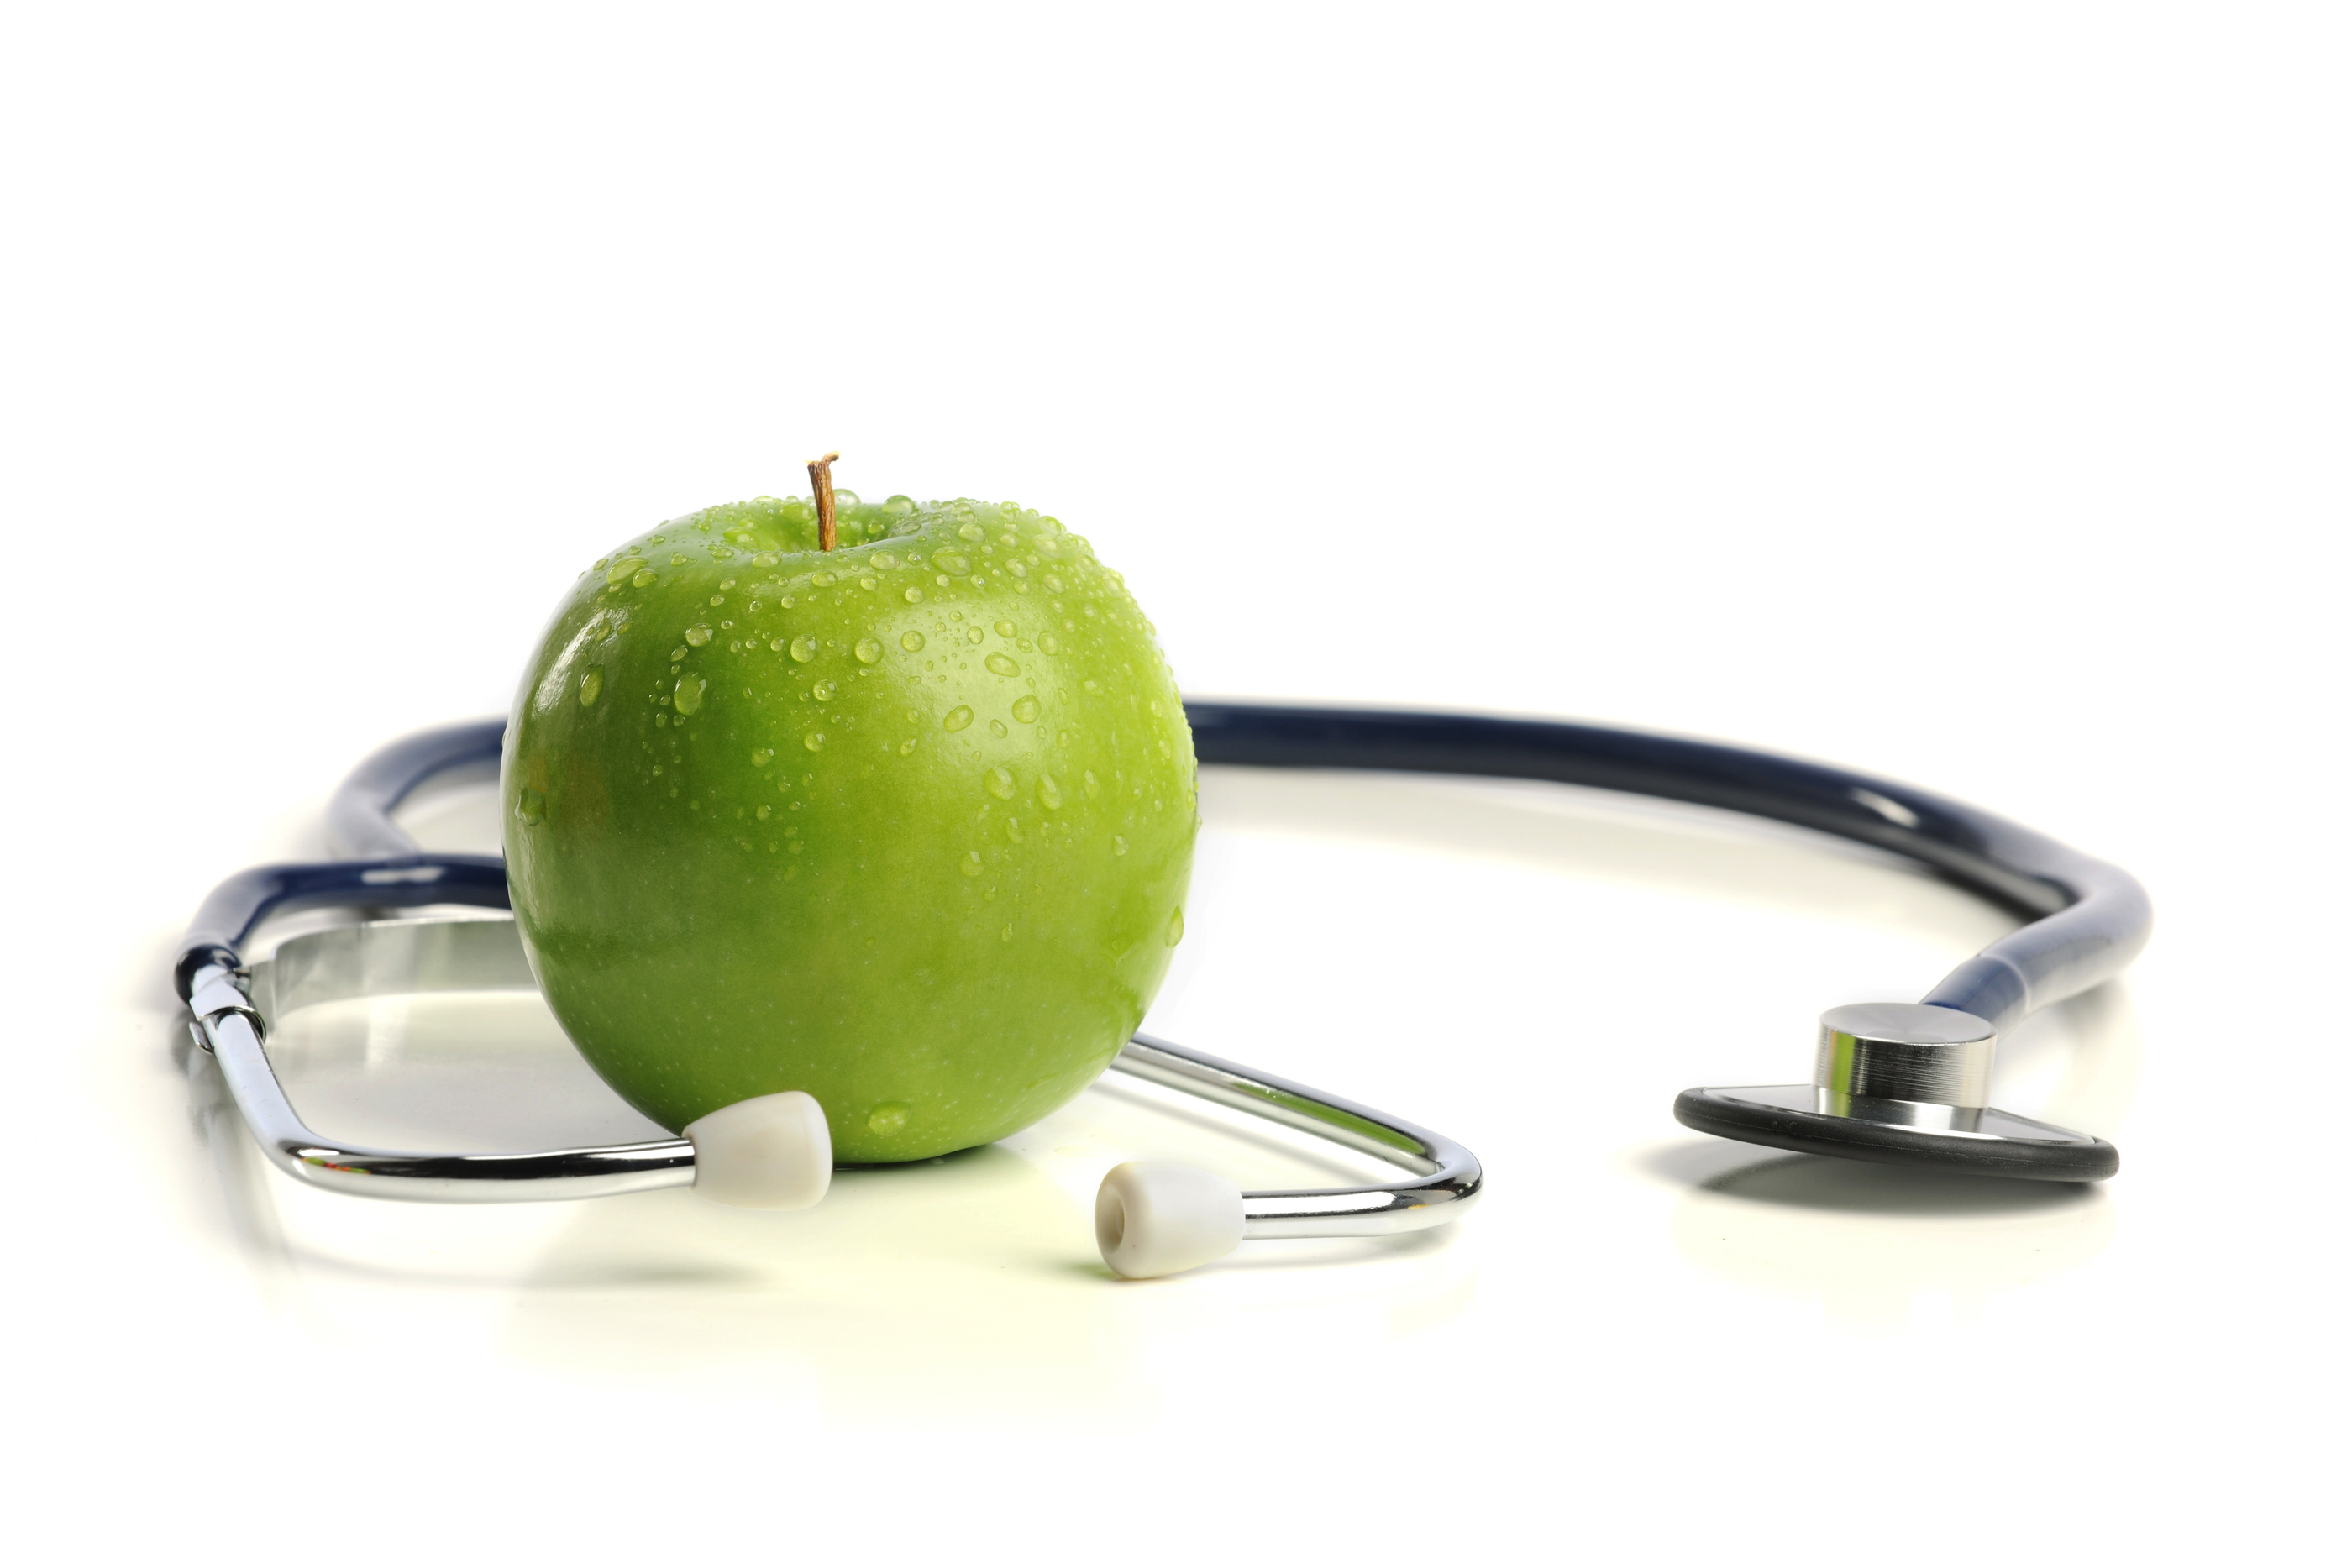 a Stethoscope and a green Apple